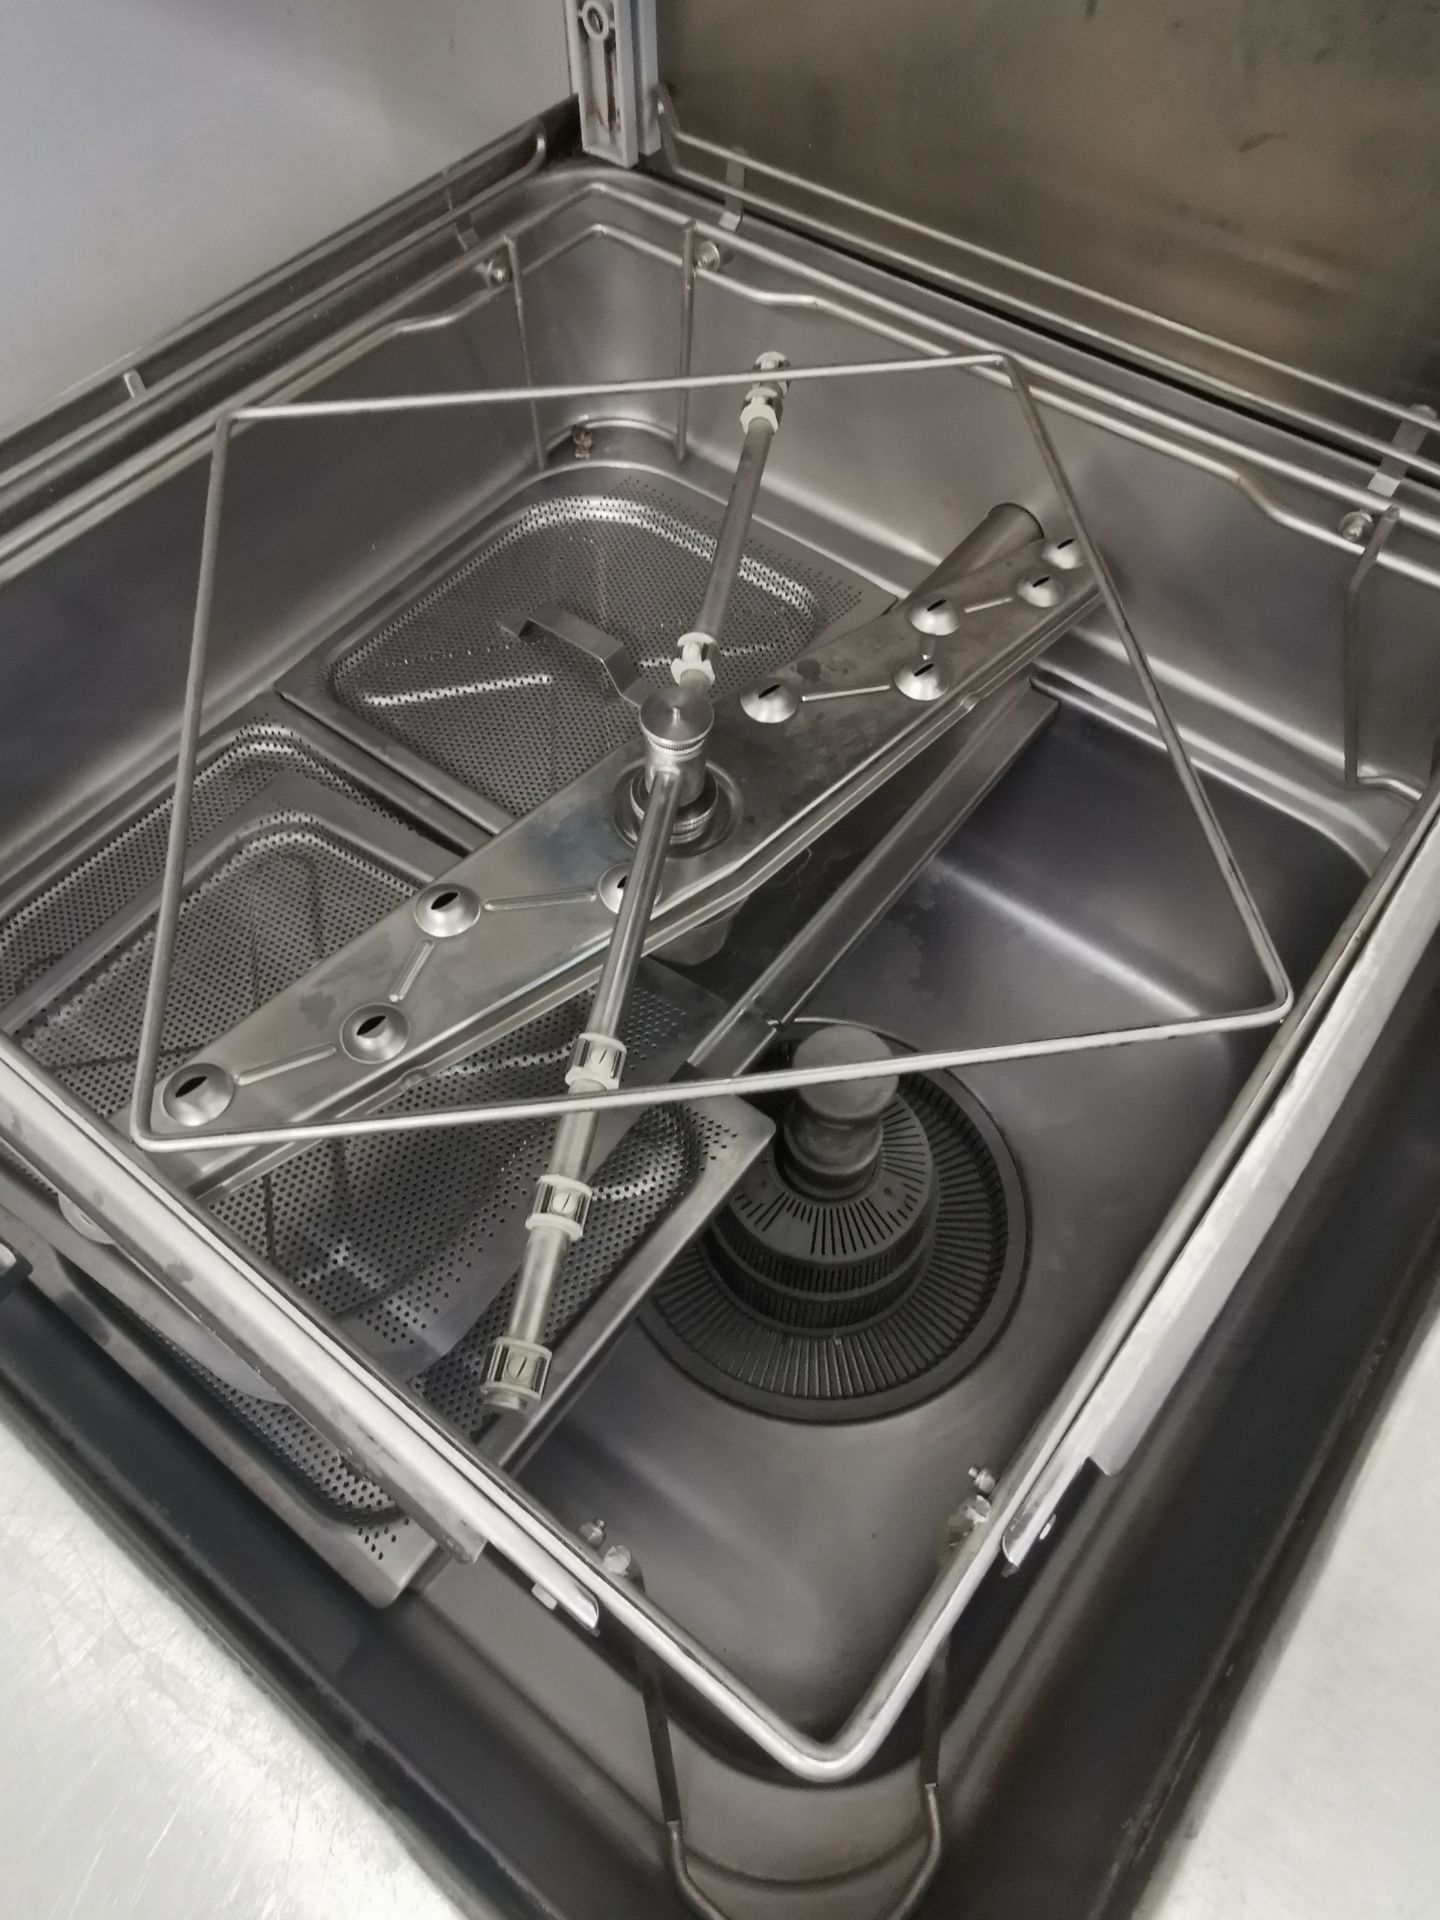 Hoonved Model CAP10E Tray feed dish washer and sta - Image 5 of 8